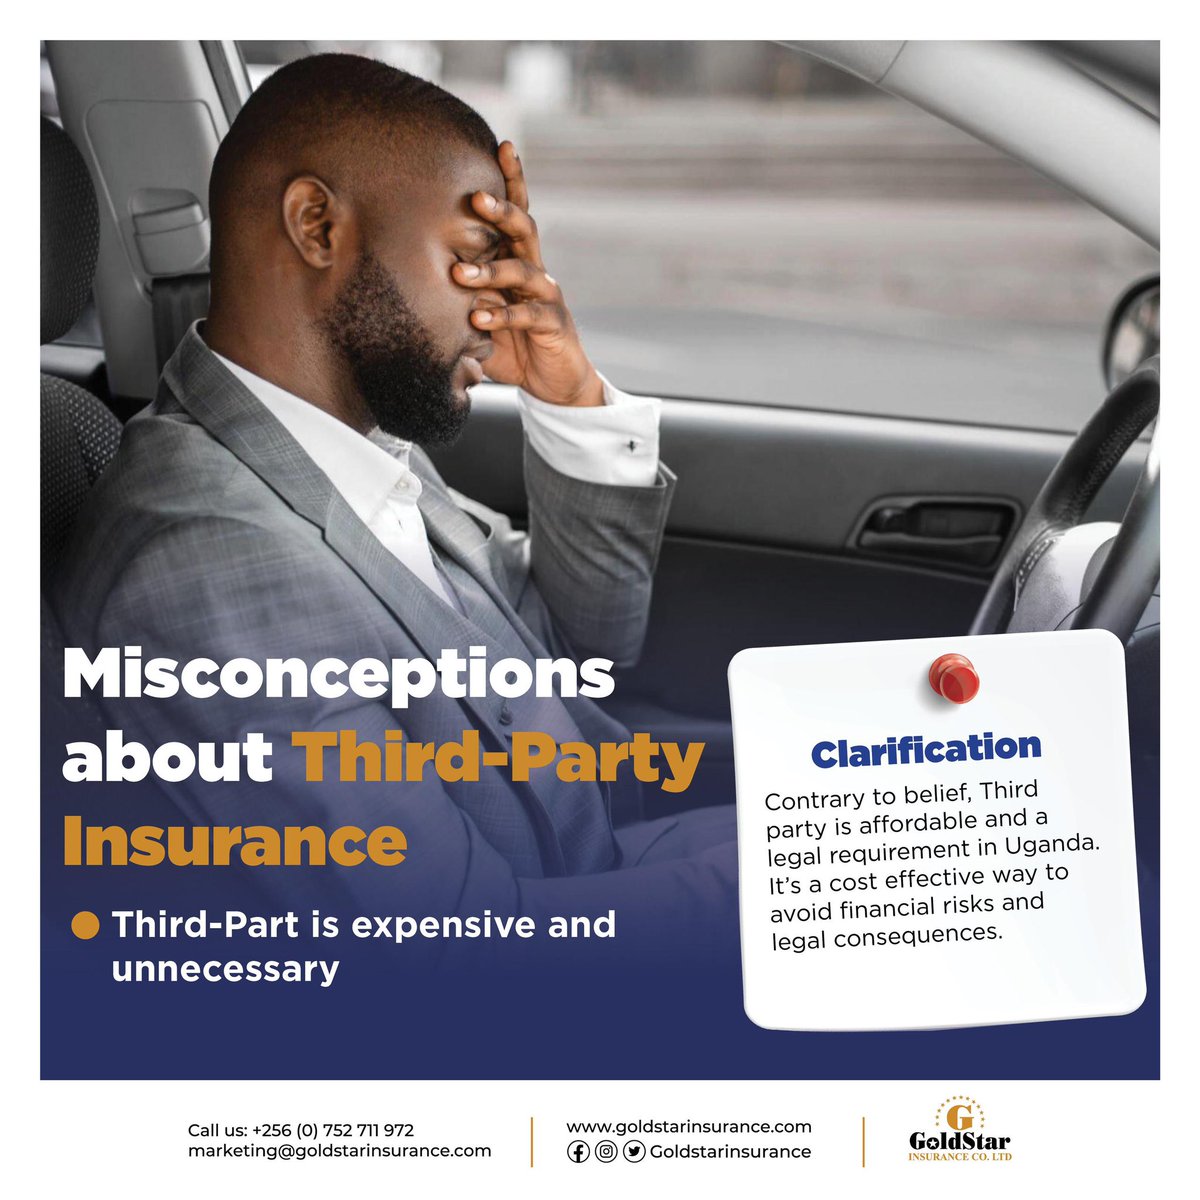 Decoding Third-Party Car Insurance Myths! Don’t be fooled - it’s not just about others, it’s about YOU making smart choices. Here’s the truth behind the common misconceptions.

#InsuranceTruths #DriveSmart #Goldstarinsurance #TheFutureAssured